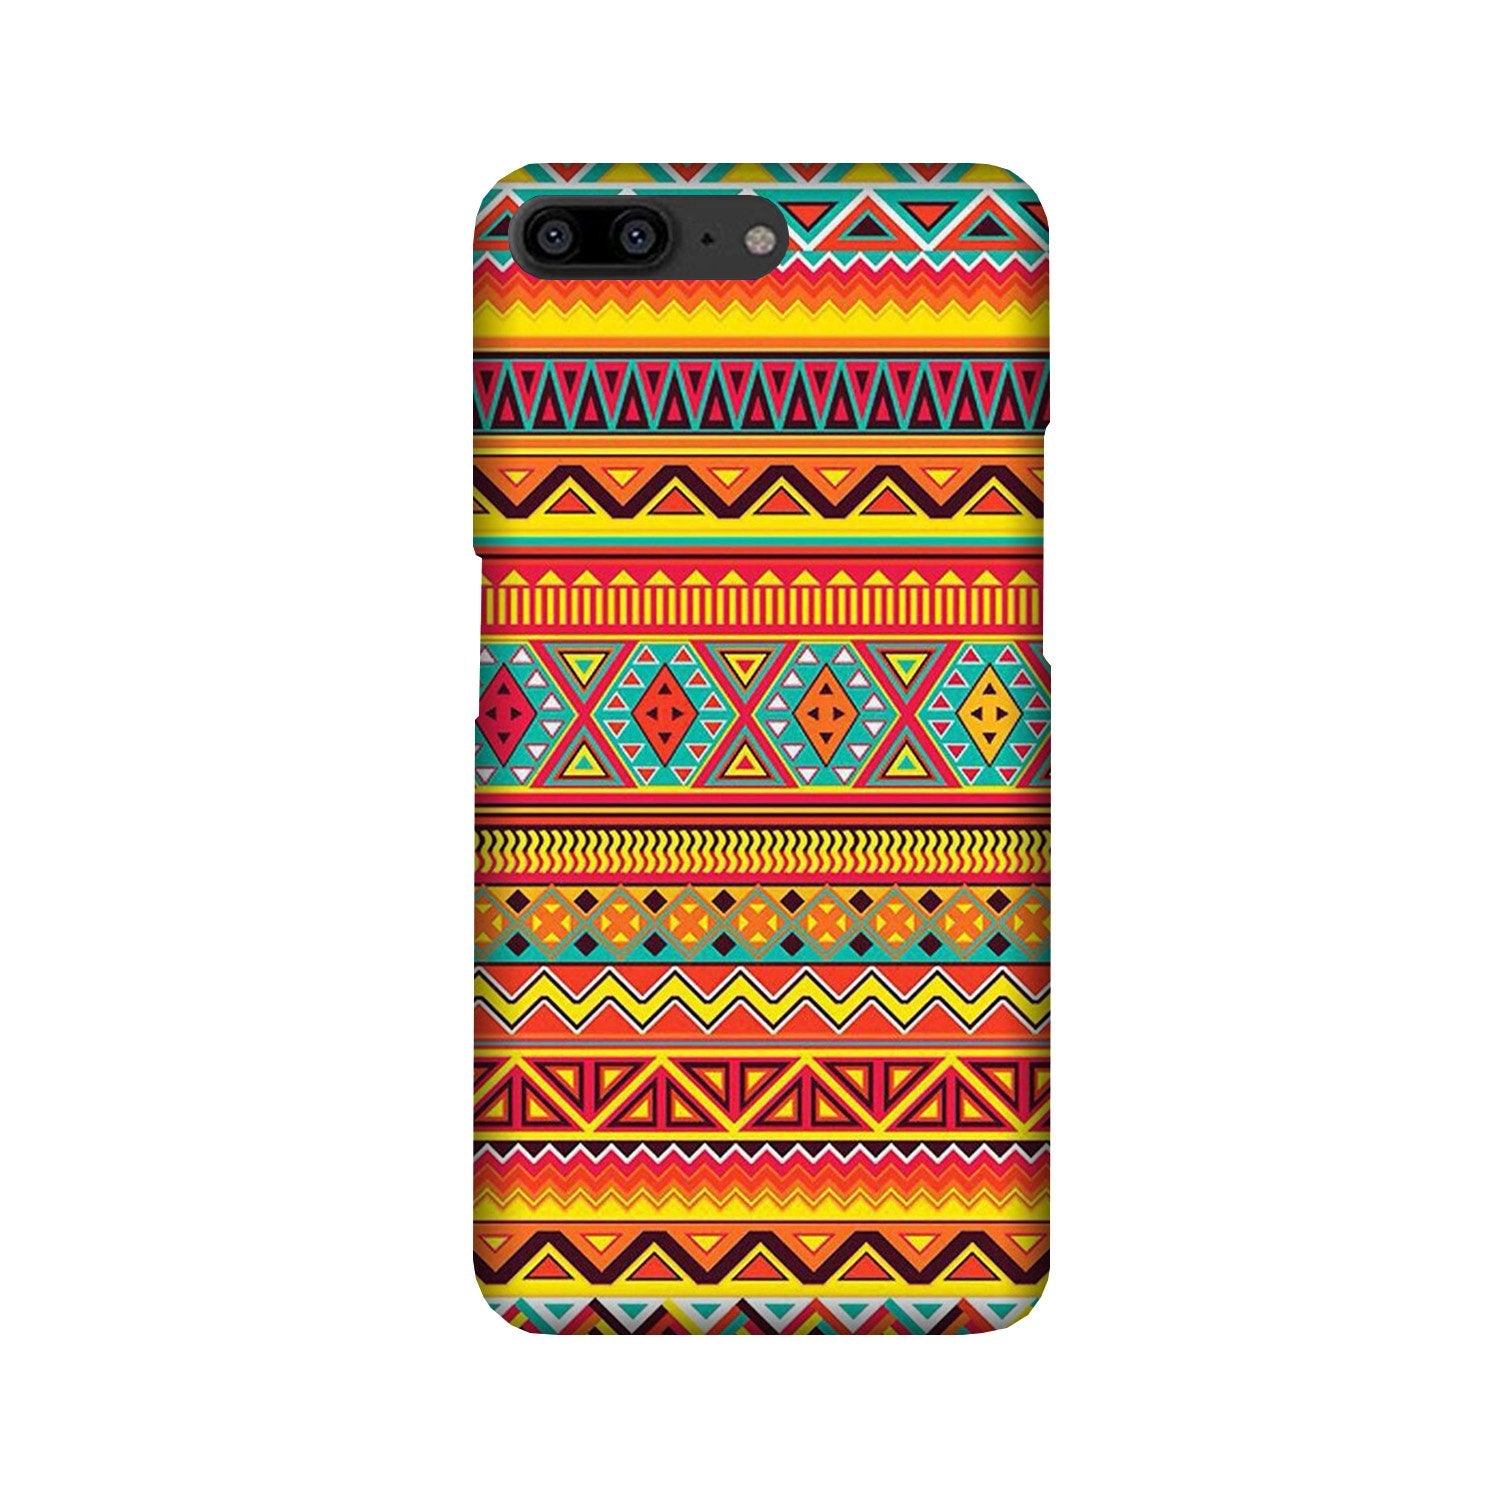 Zigzag line pattern Case for OnePlus 5